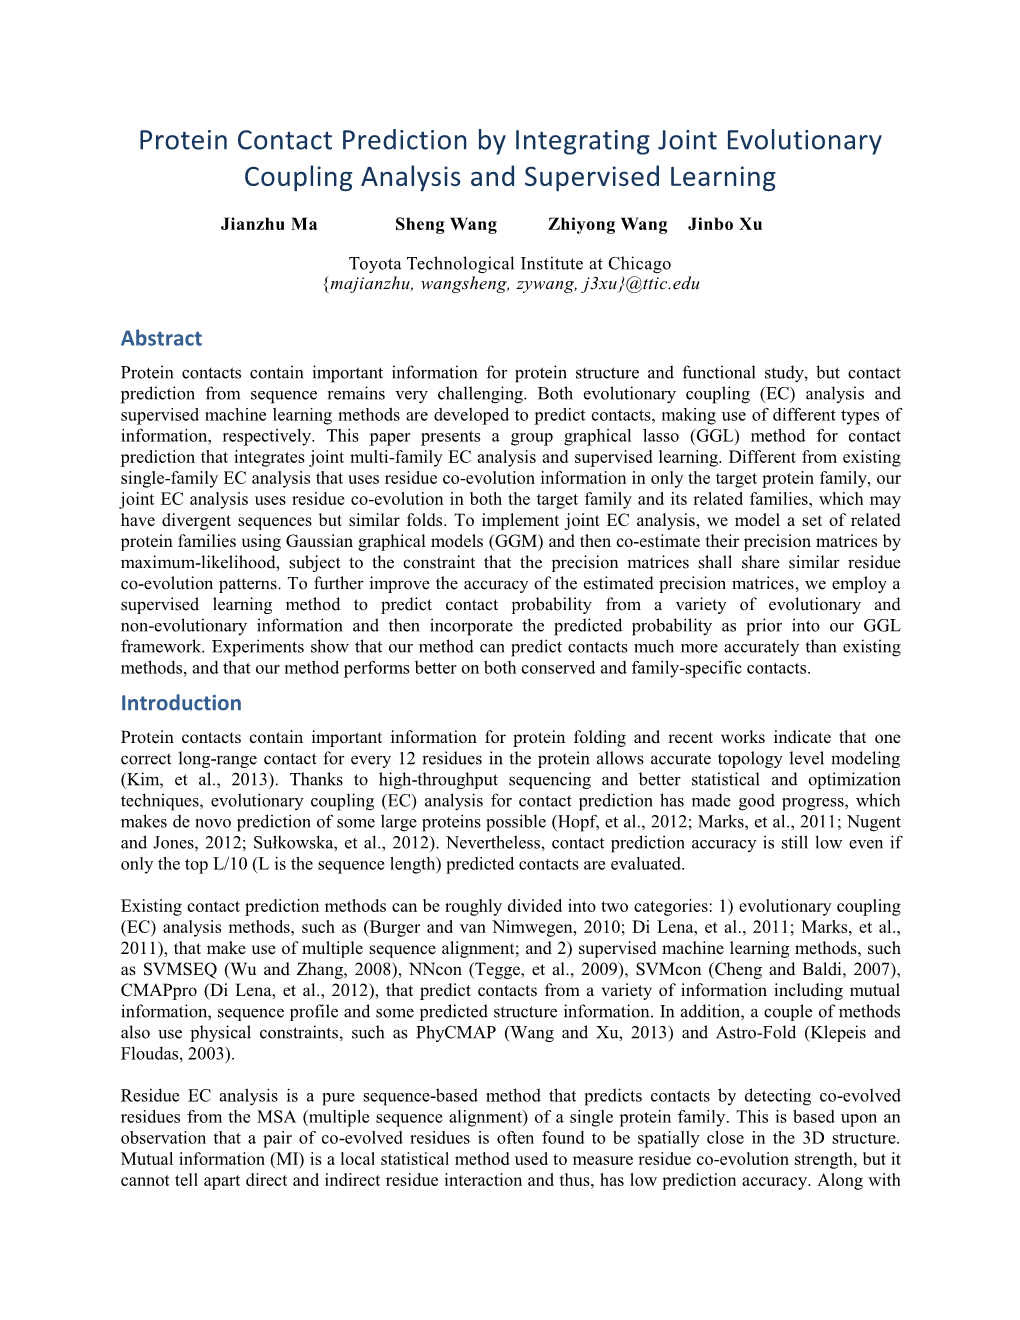 Protein Contact Prediction by Integrating Joint Evolutionary Coupling Analysis and Supervised Learning